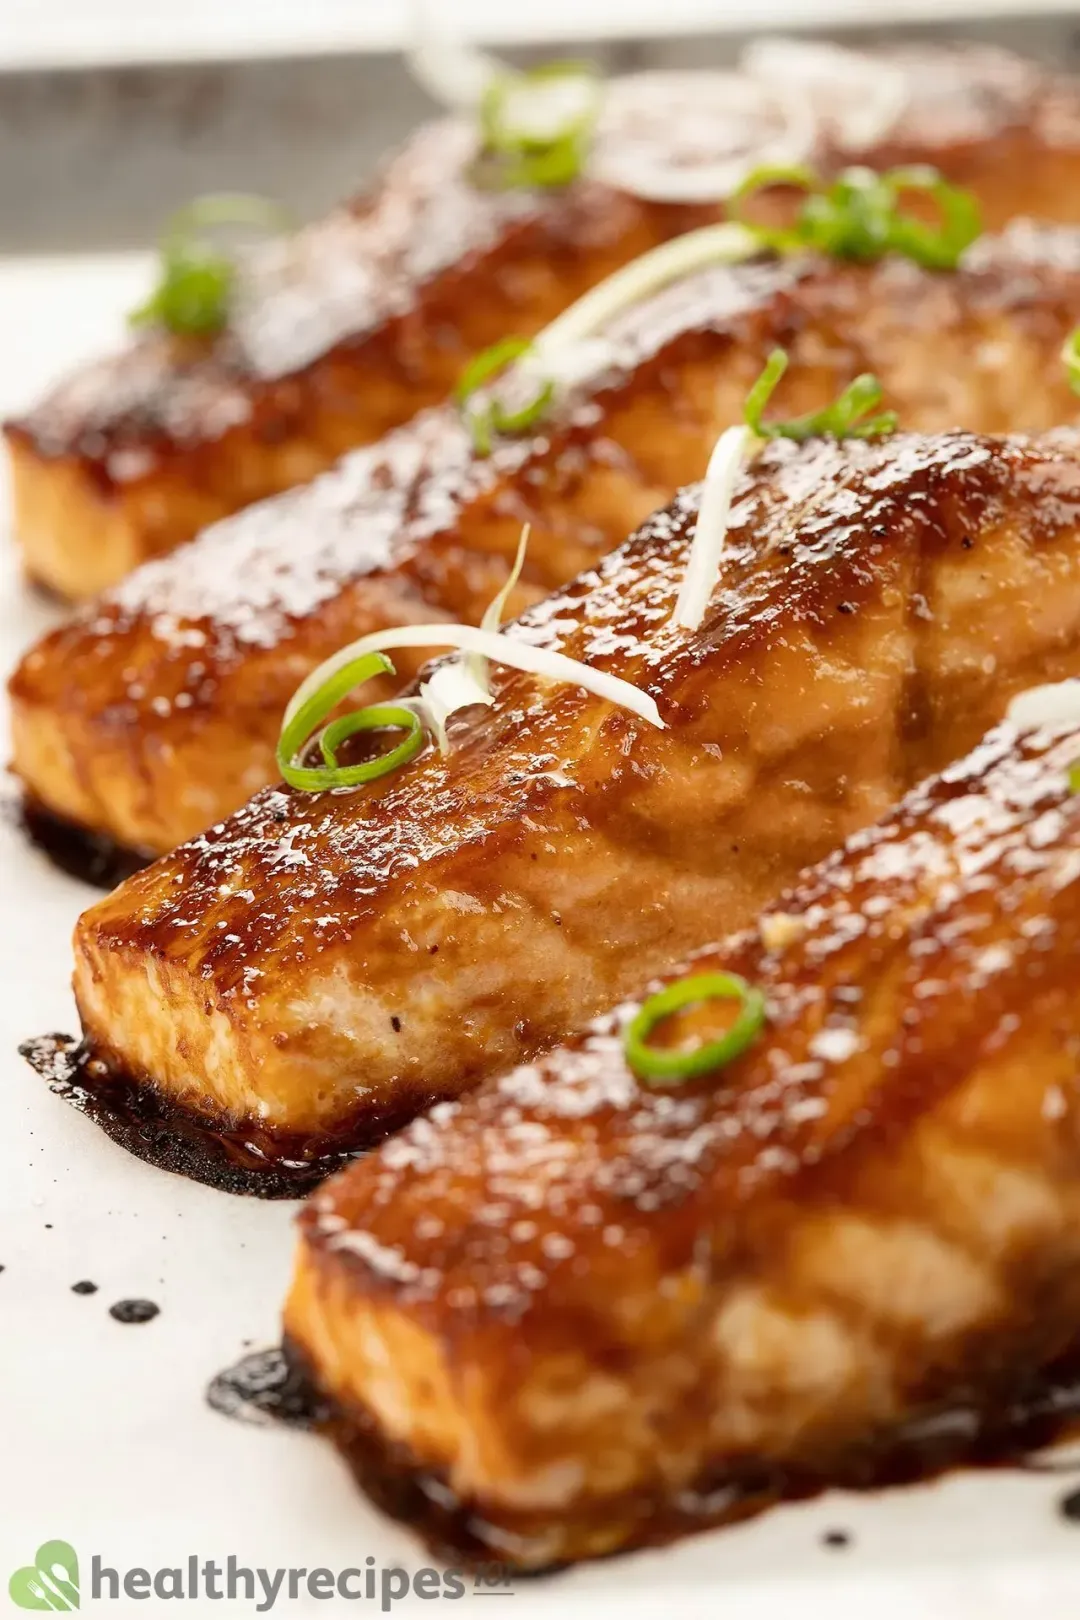 A close-up shot of salmon fillets covered in a glossy brown miso sauce and garnished by a few chopped scallions